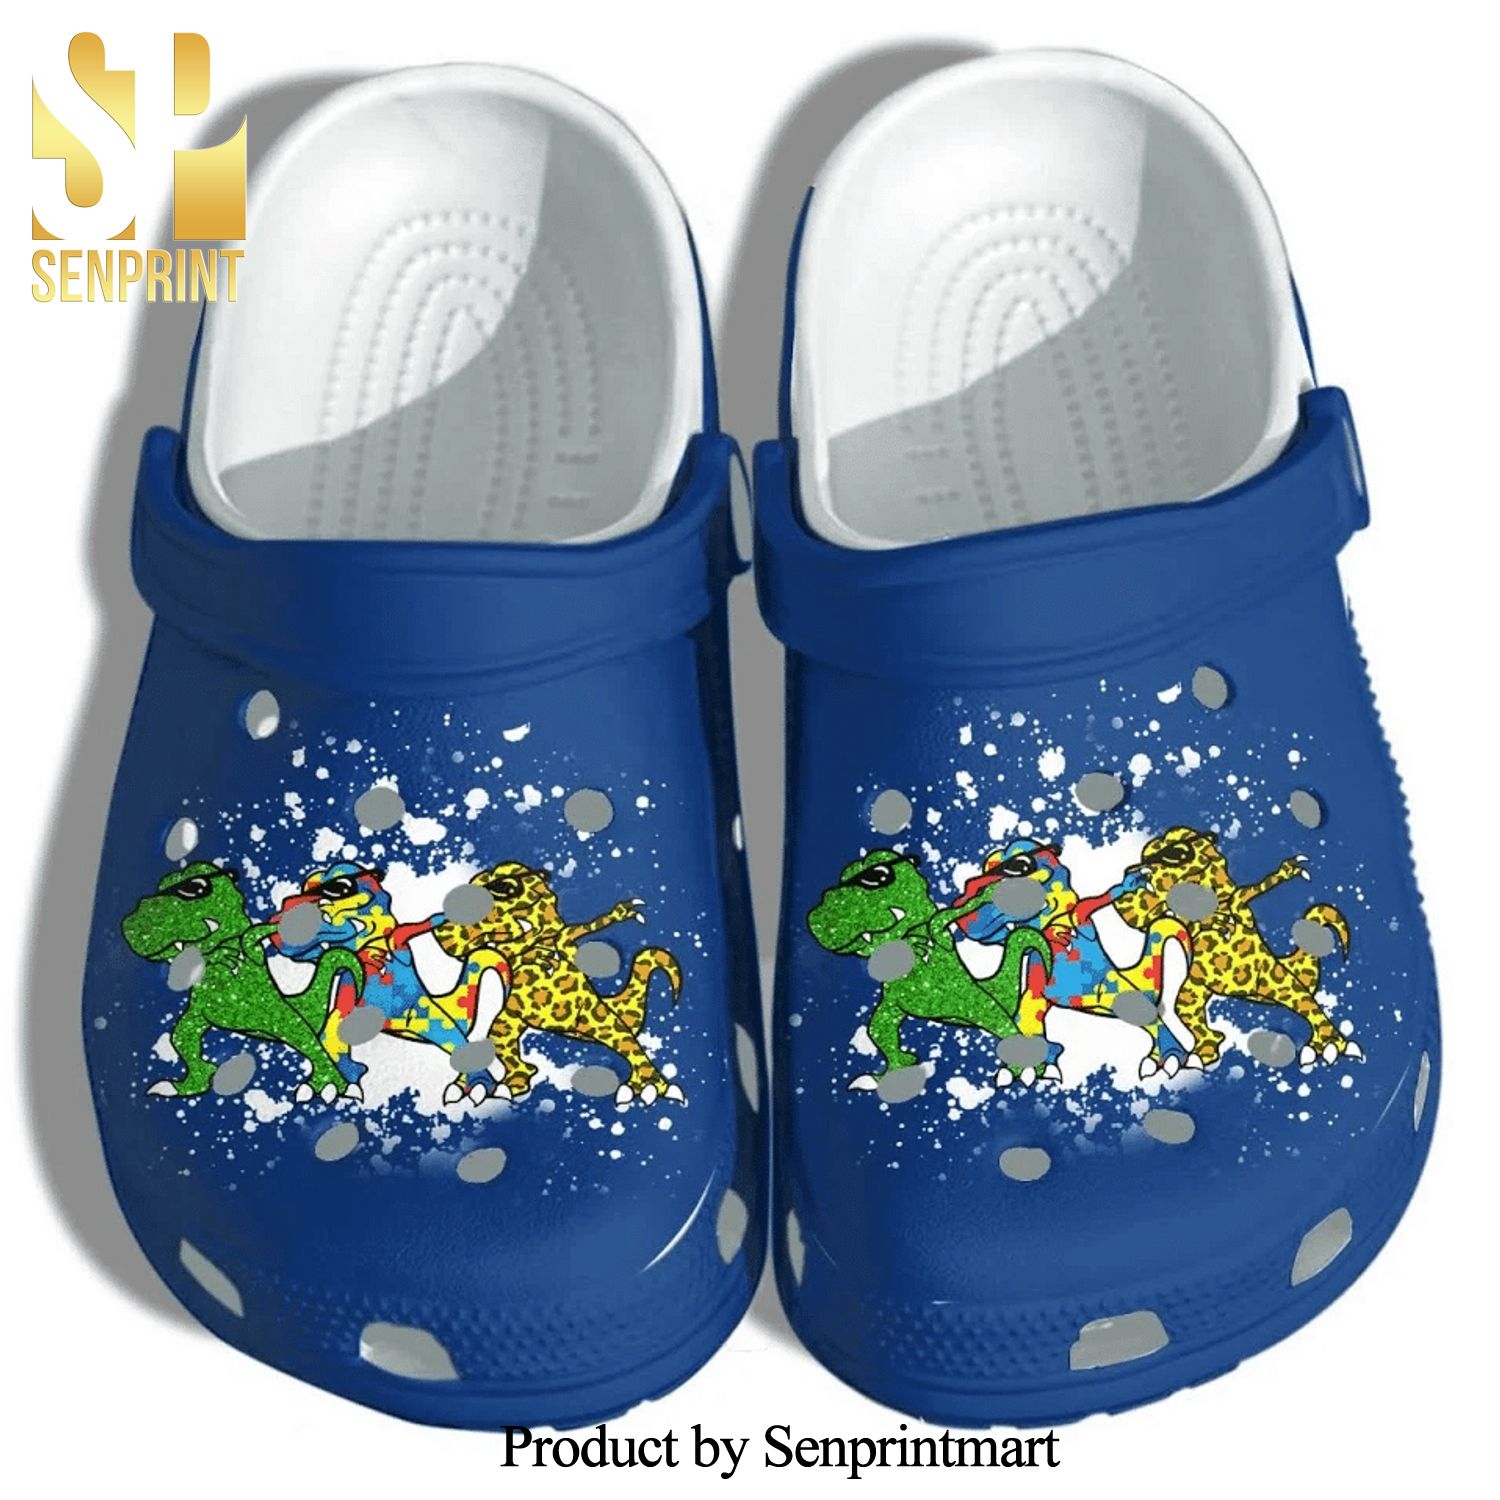 T-Rex Dinosaurs Autism Kids Awareness Puzzle Cute Gift For Lover Street Style Crocband Crocs